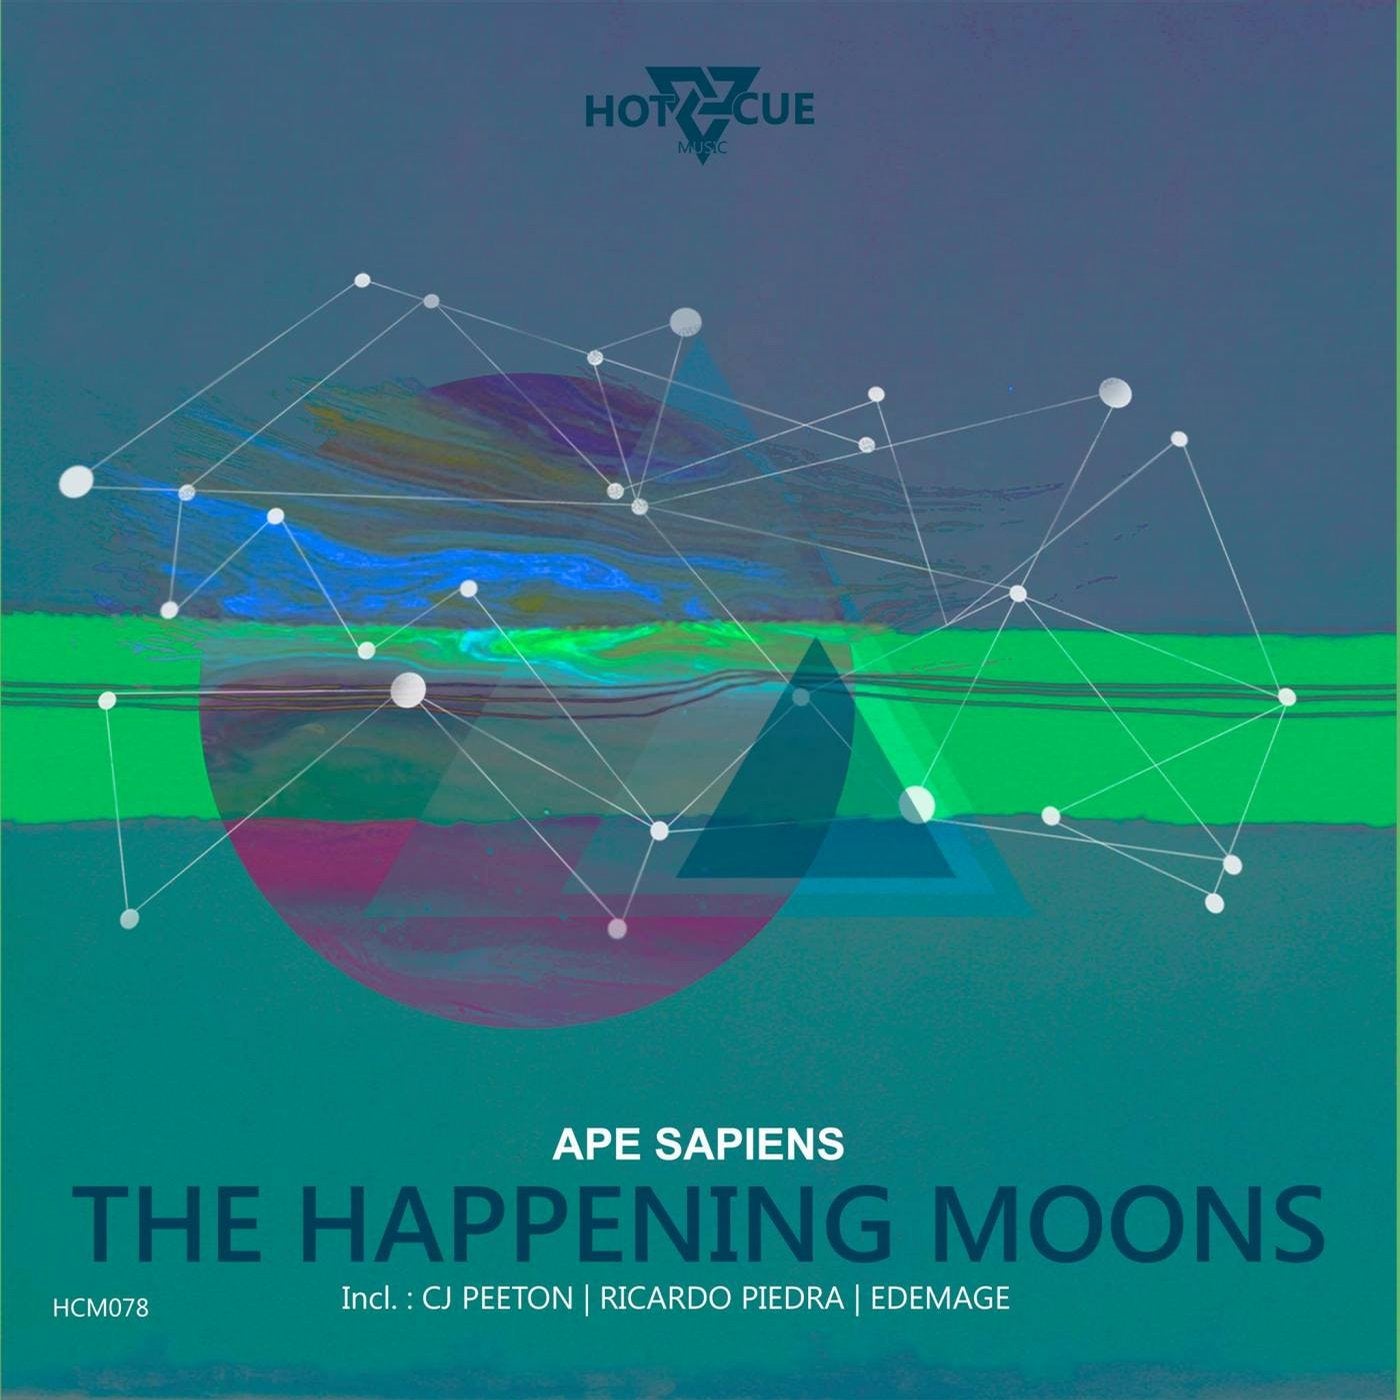 The Happening Moons